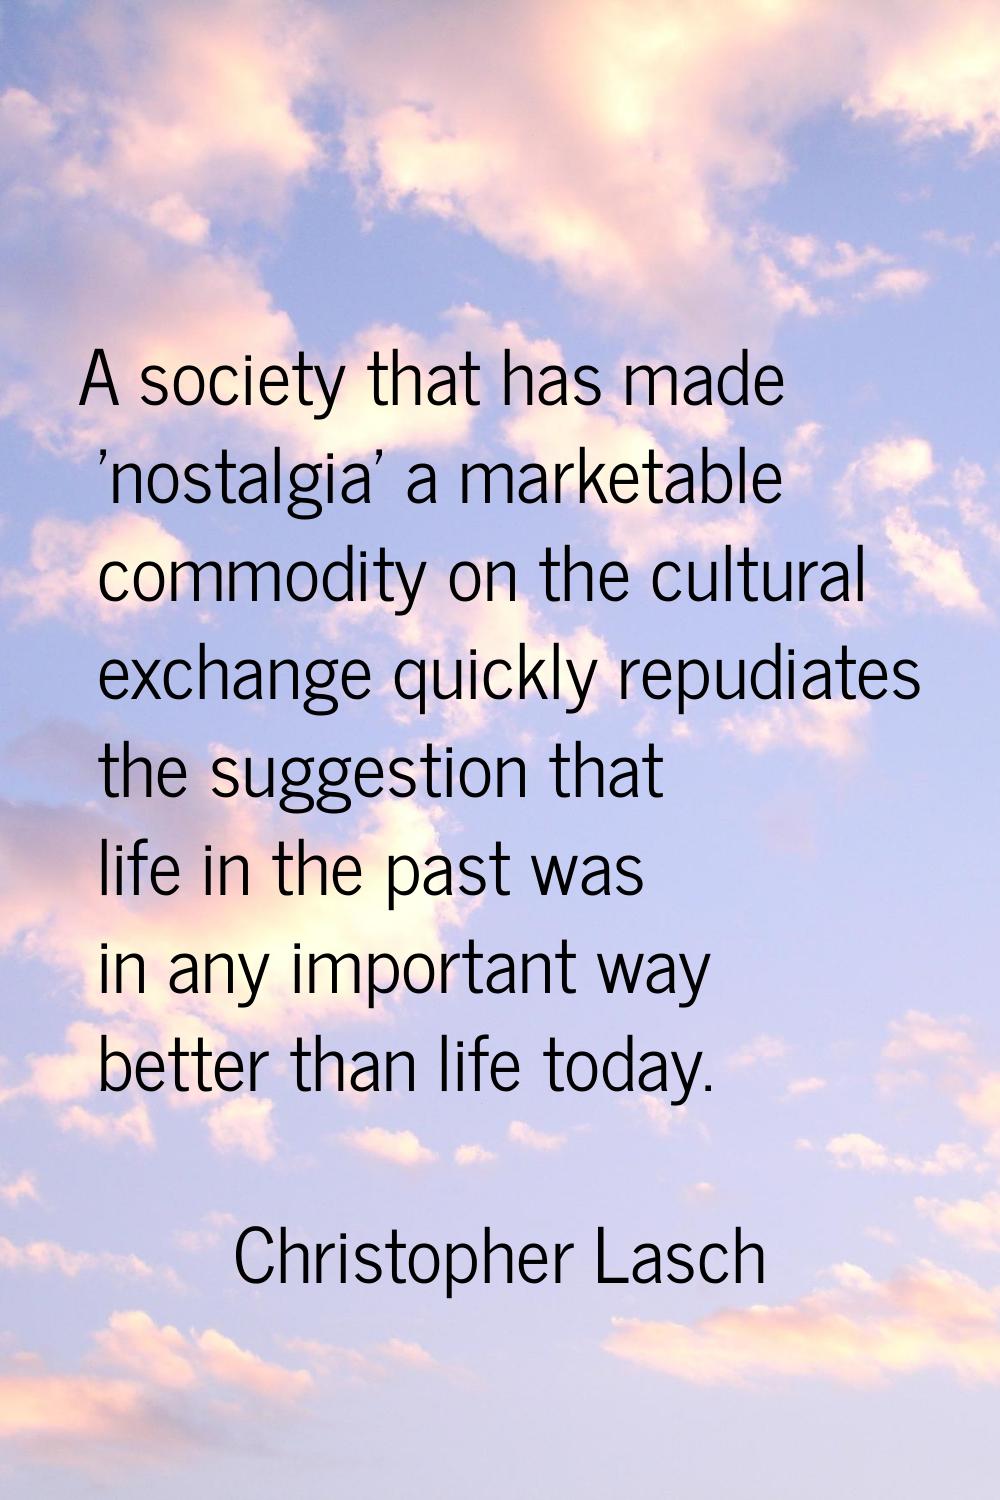 A society that has made 'nostalgia' a marketable commodity on the cultural exchange quickly repudia